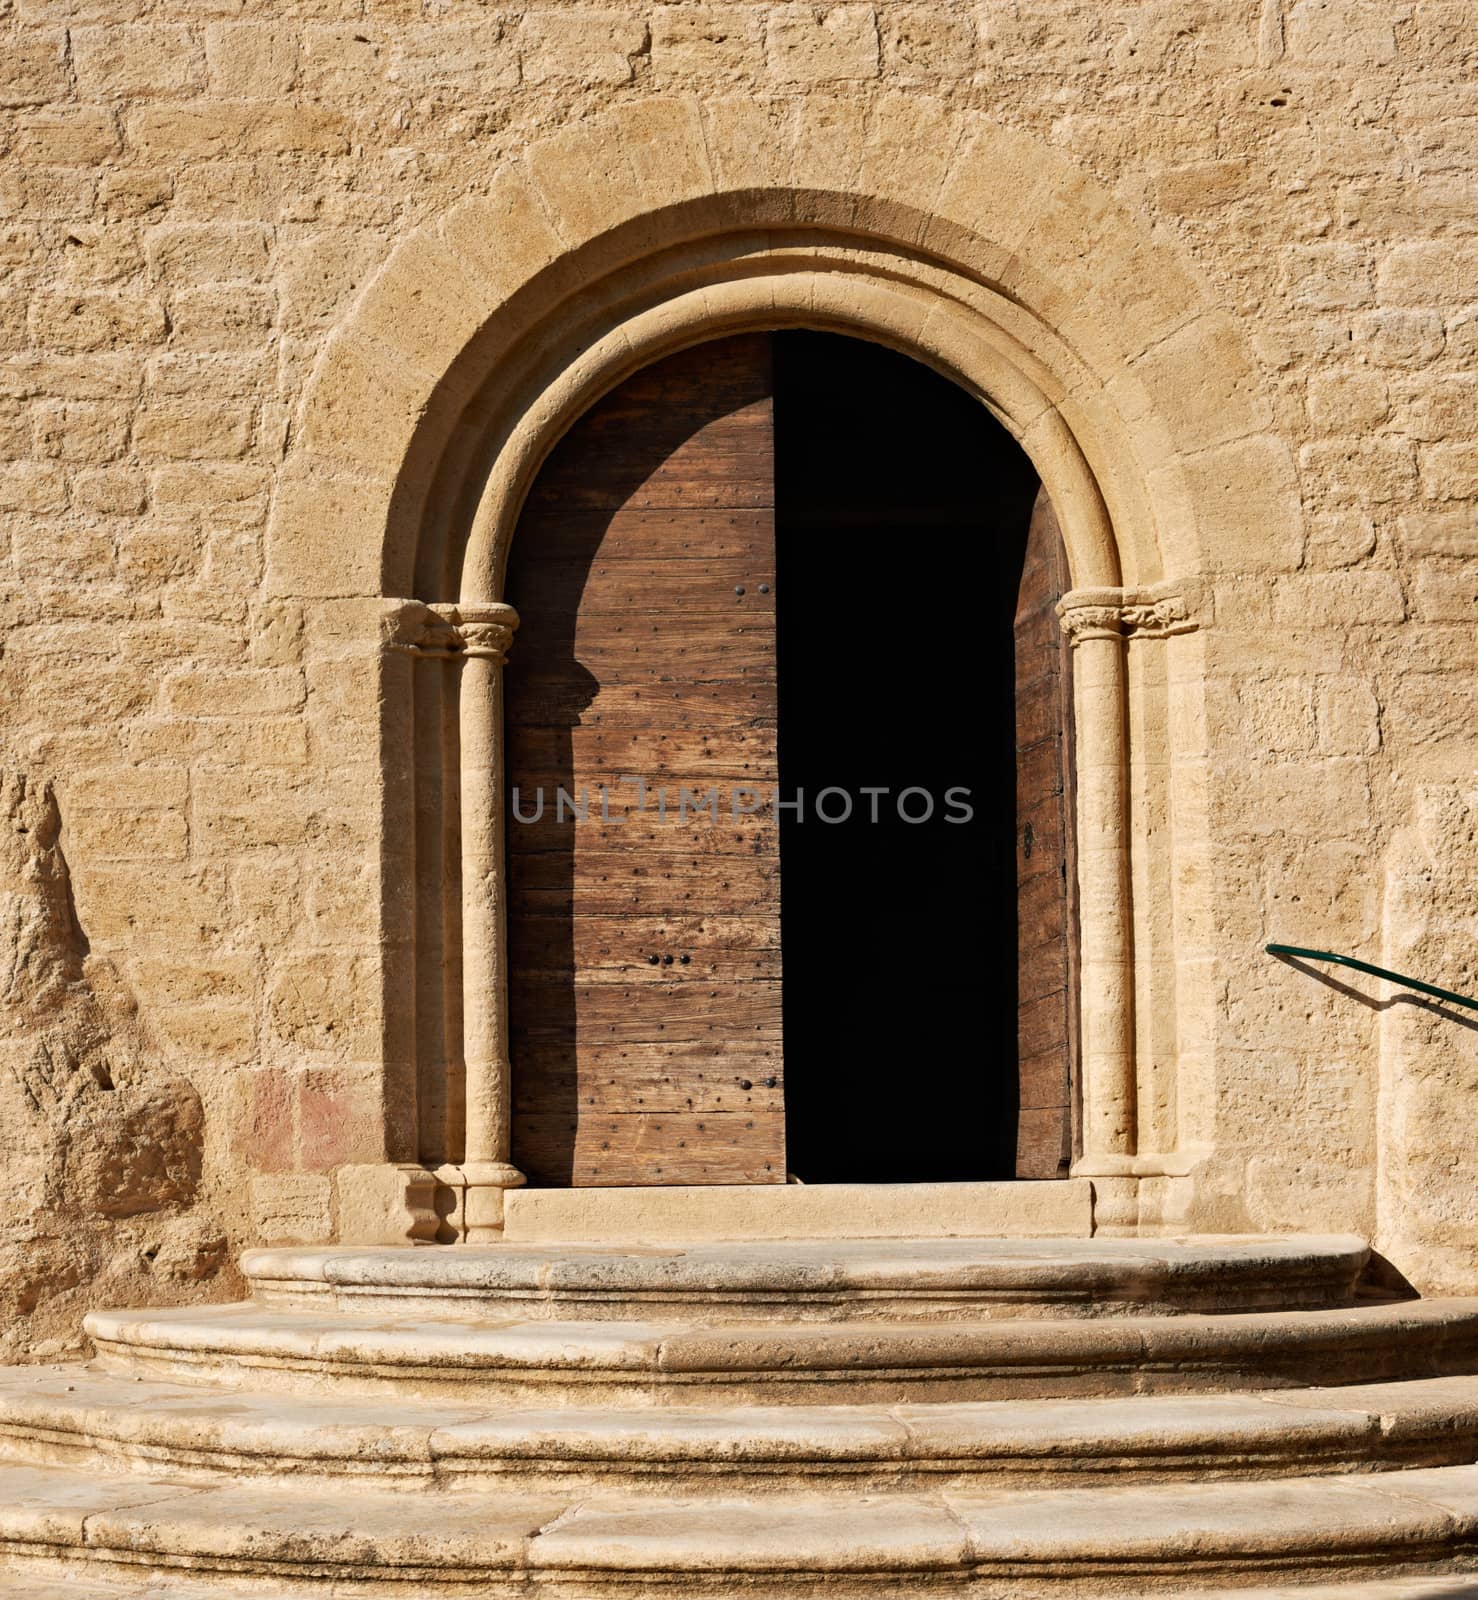 The gate of the Ansouis cathedral by ecobo